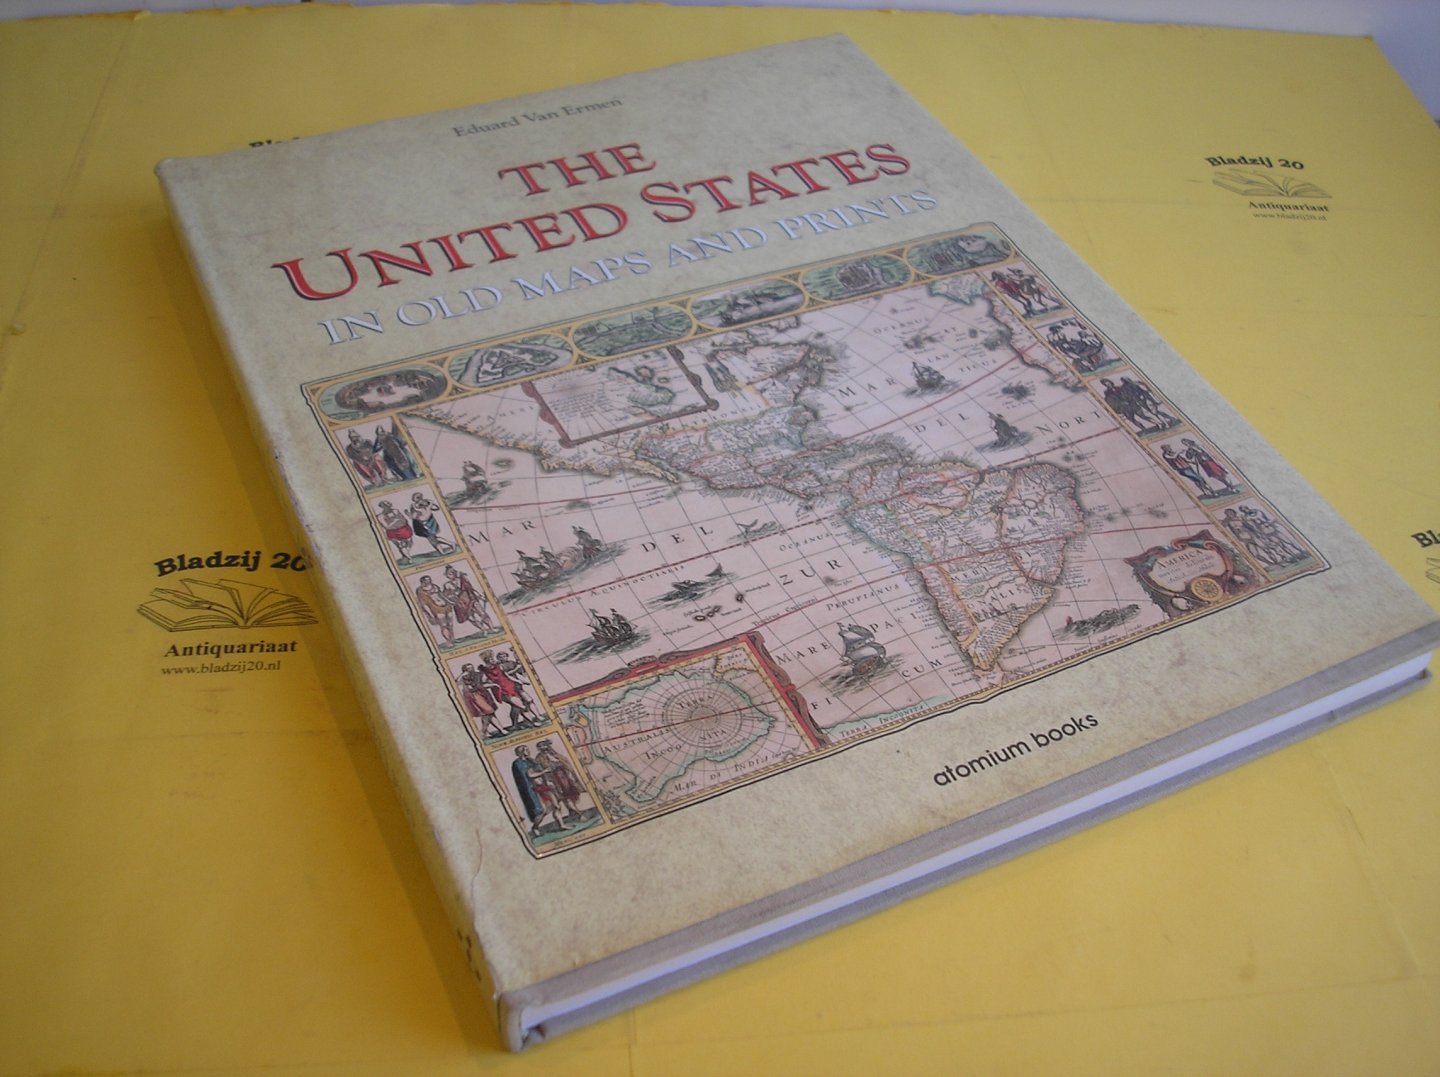 Ermen, Eduard, van. - The United States in old maps and prints.